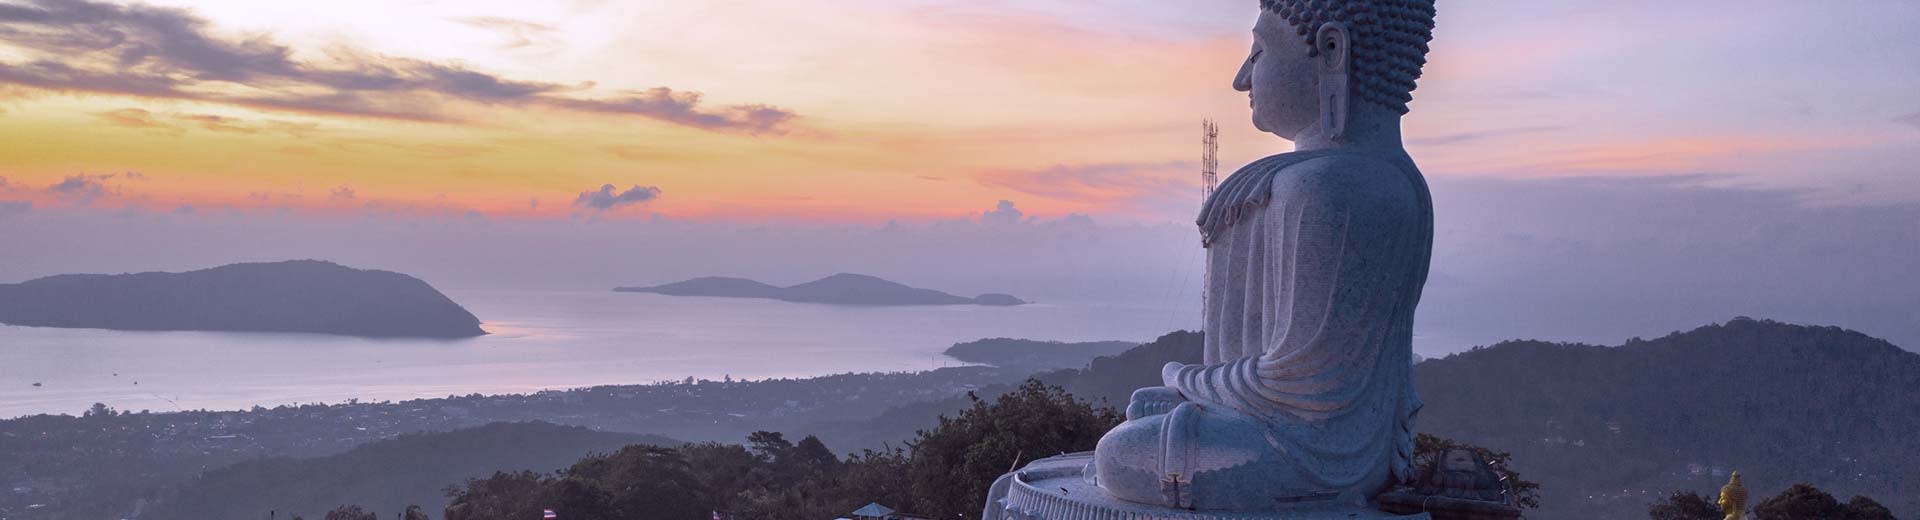 A religious statue sits on top of a hill, overlooking a coastline in the half-light of dusk.